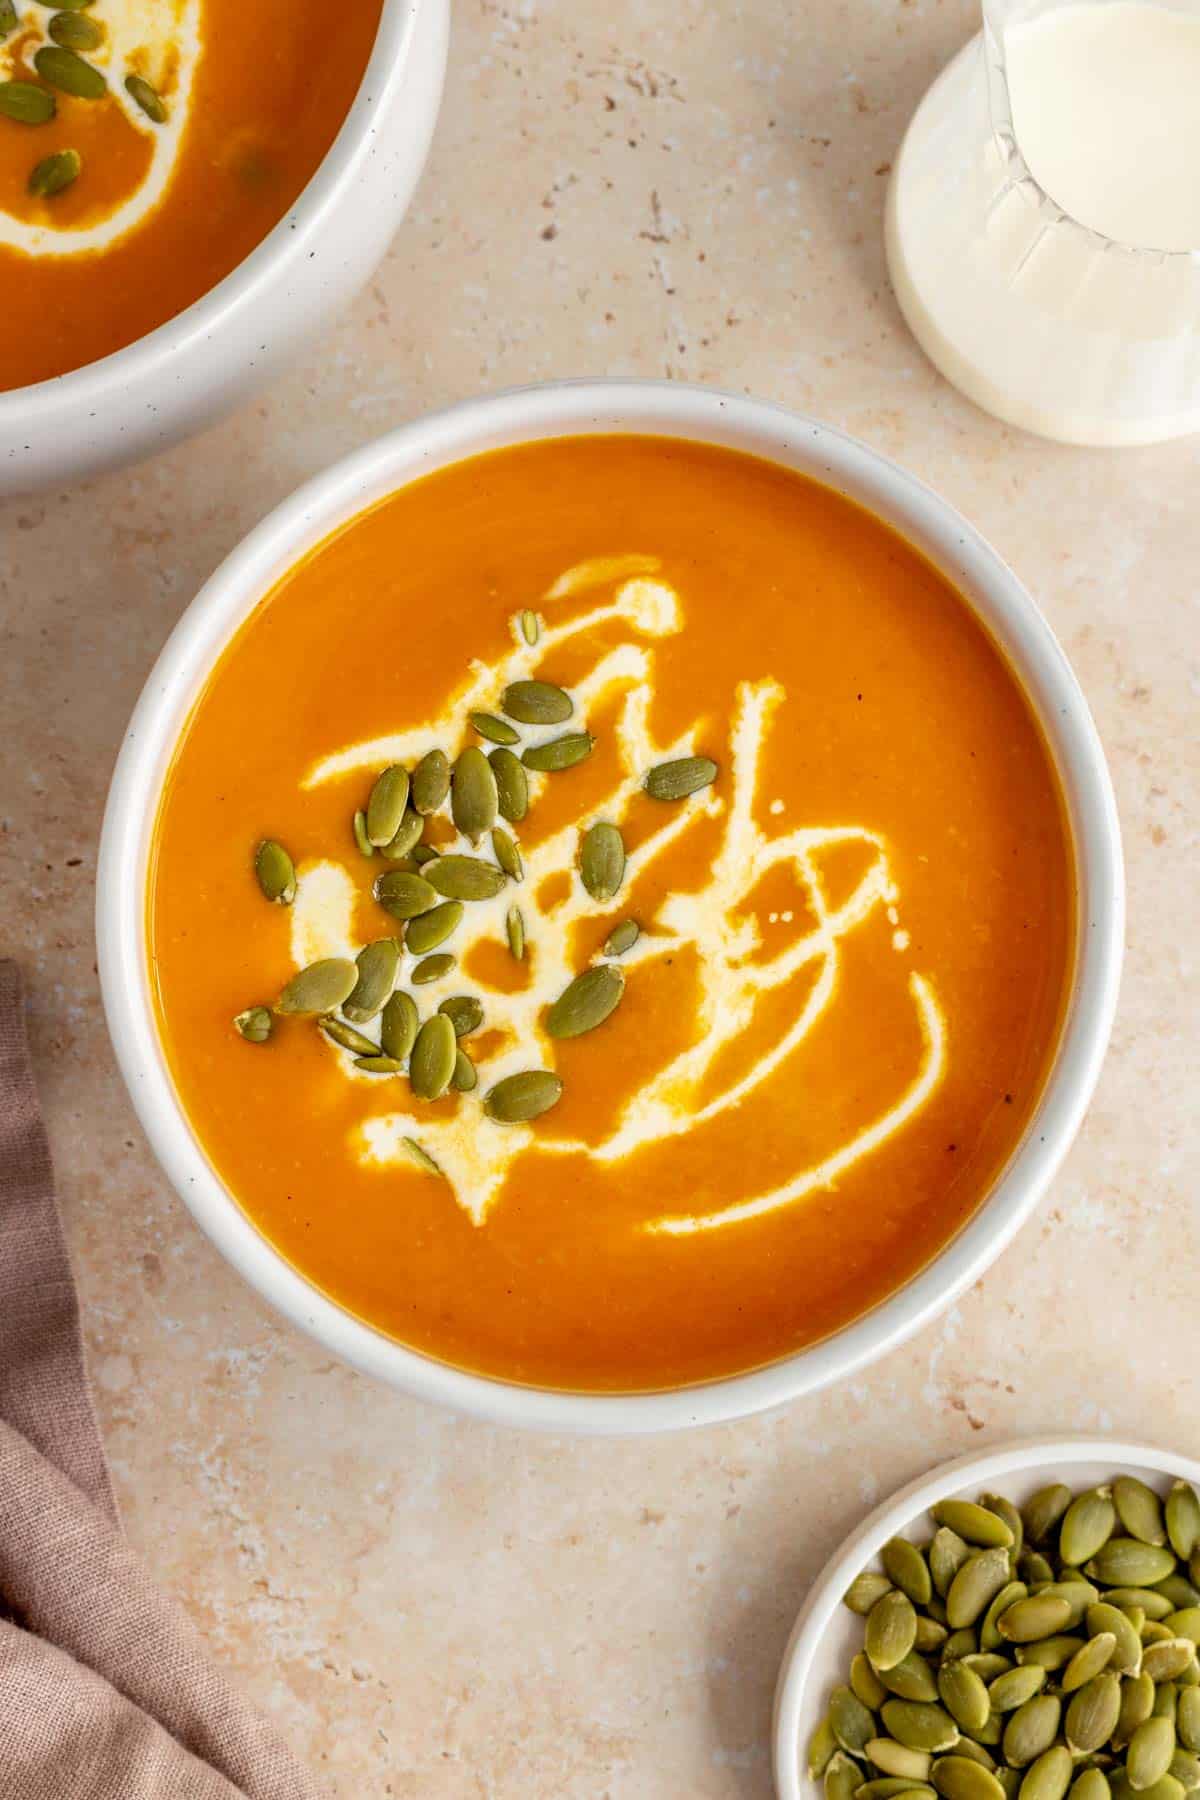 Overhead view of a bowl of sweet potato and pumpkin soup garnished with coconut milk and pumpkin seeds. More coconut milk and pumpkins off to the side.